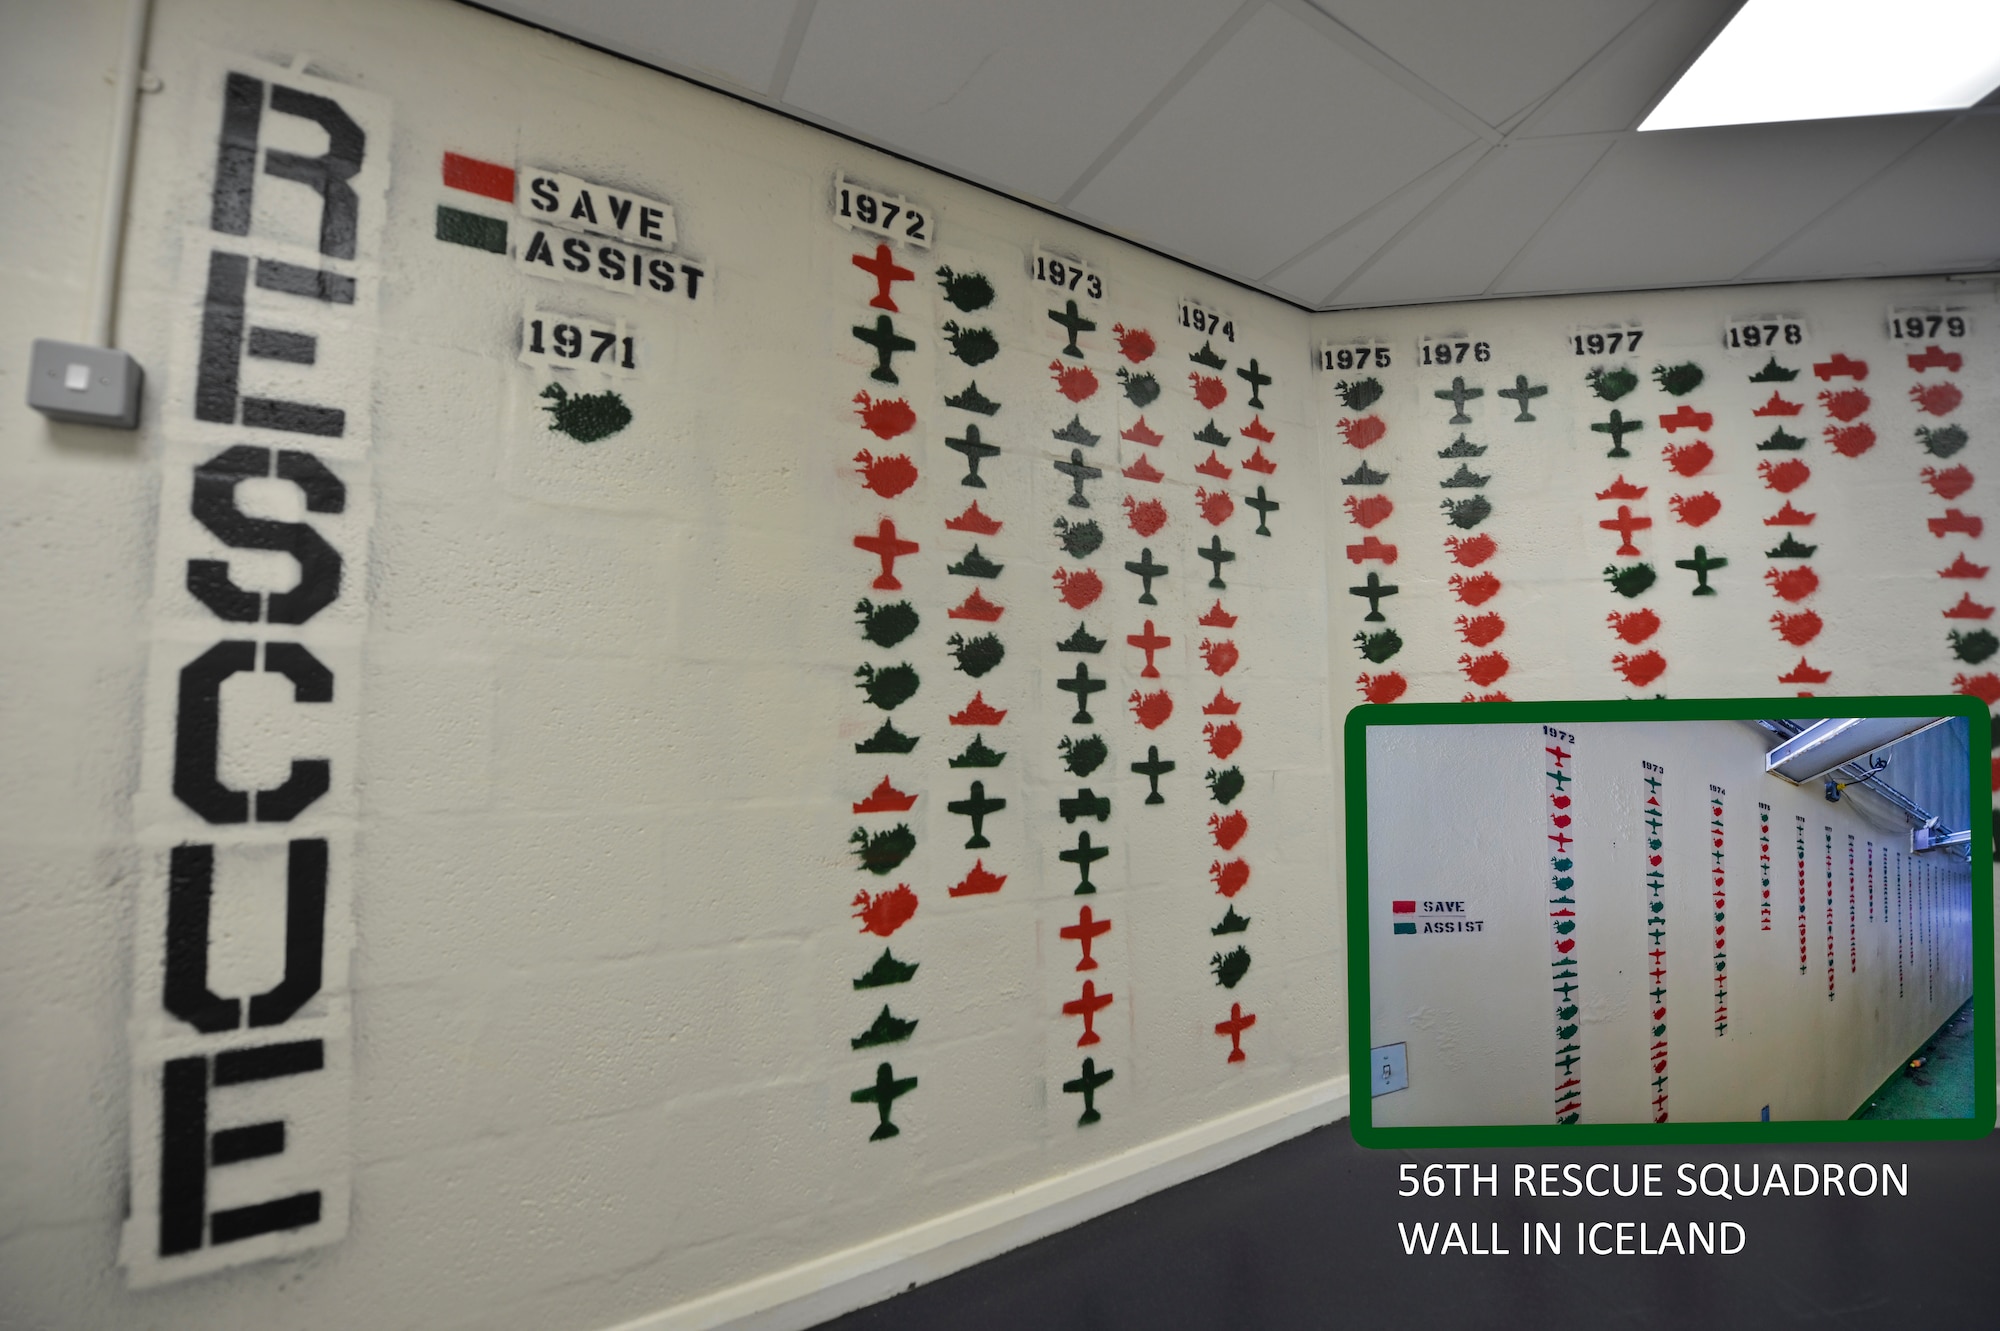 A newly-painted rescue wall was created at the 56th Rescue Squadron operations building at Royal Air Force Lakenheath, England, March, 16, 2016. The wall documents the squadron’s achievements since 1971, and was painted to resemble the squadron’s previous wall in Iceland. (U.S. Air Force photo by Senior Airman Nigel Sandridge)